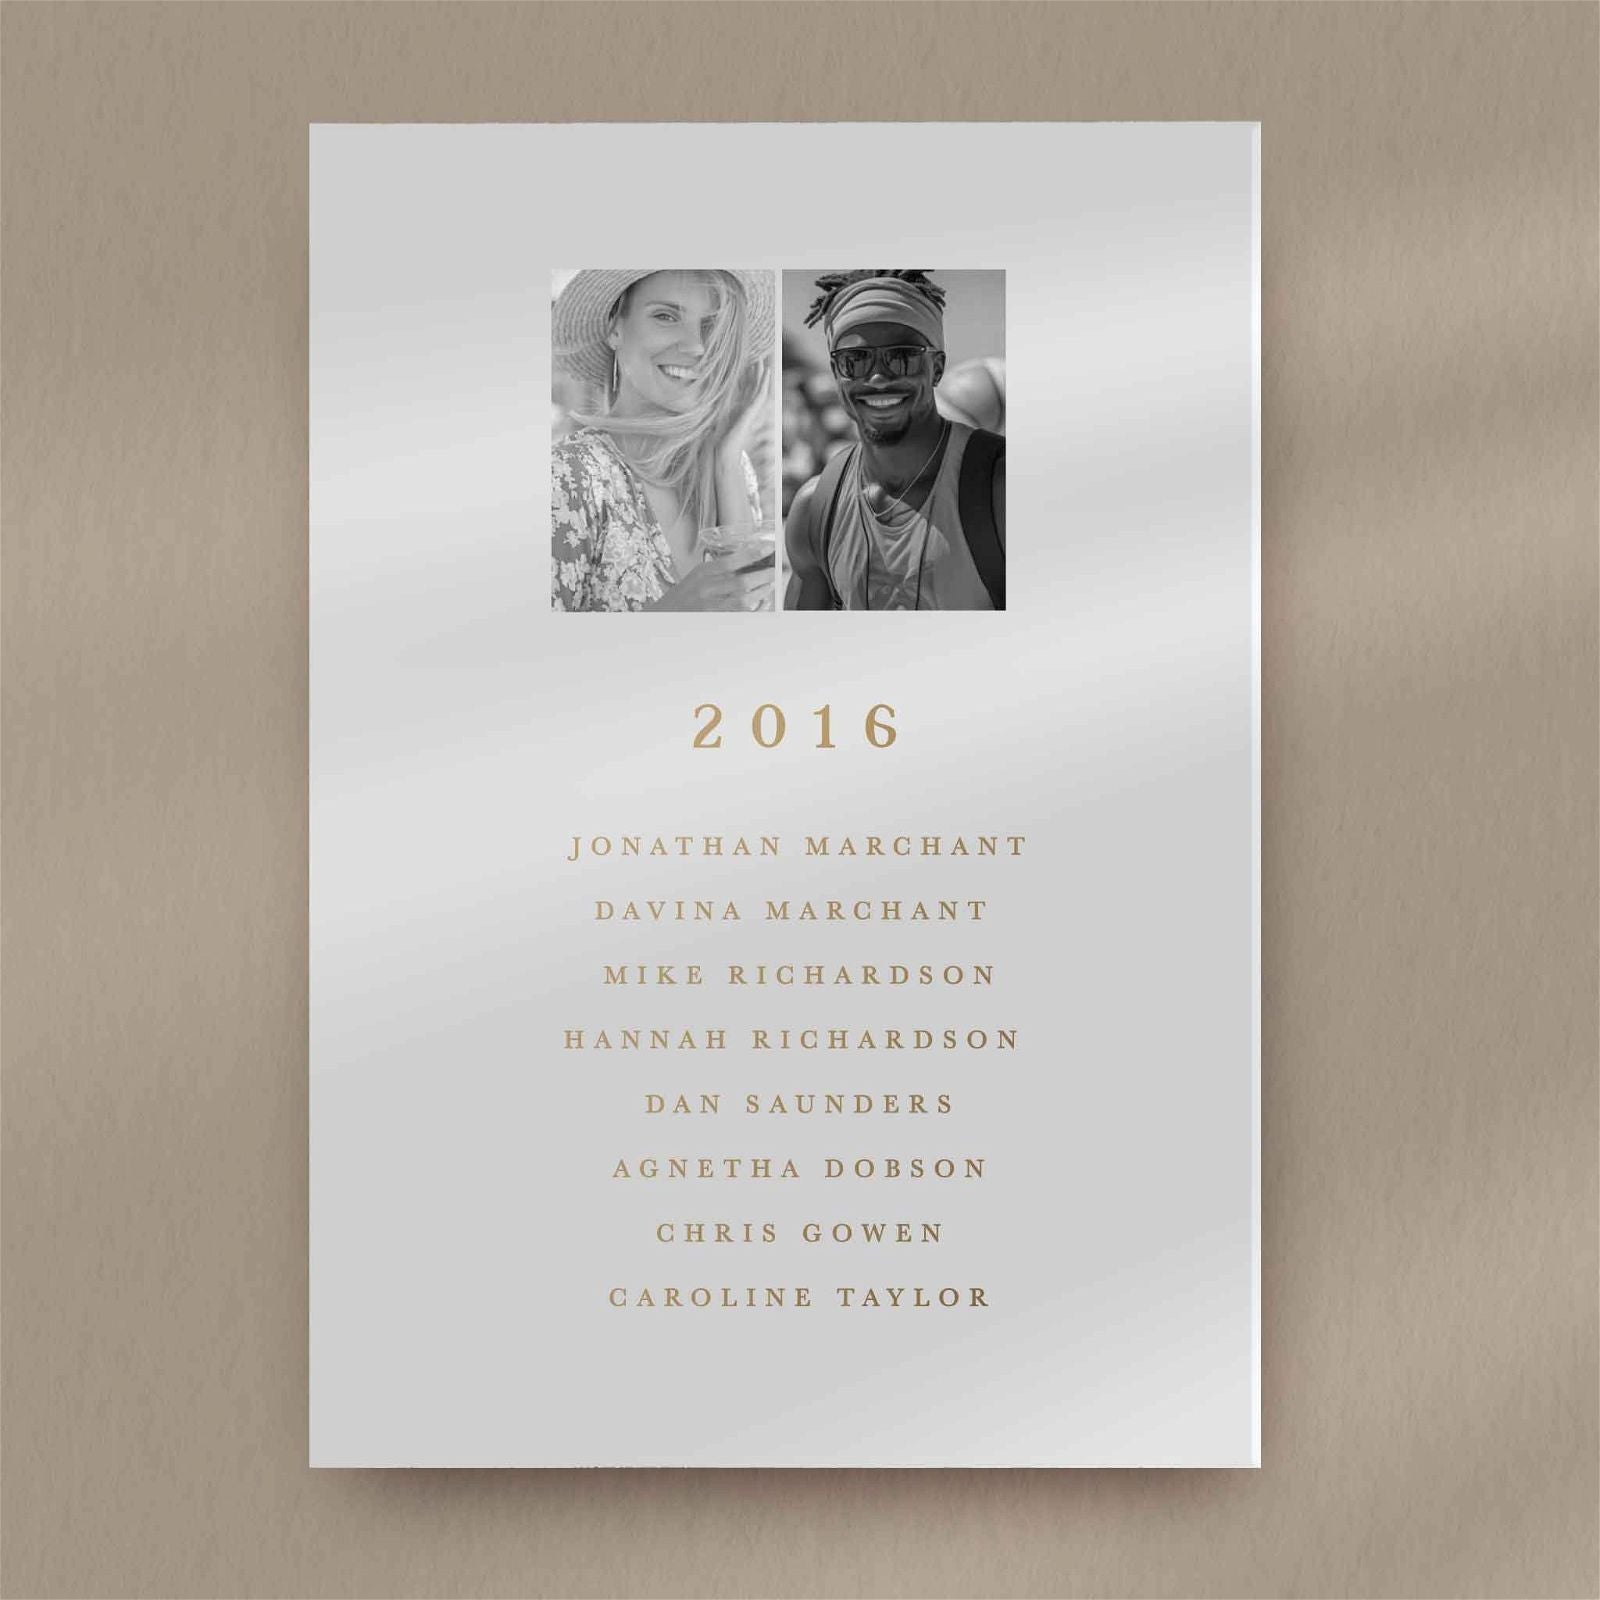 Heidi Seating Plan Card  Ivy and Gold Wedding Stationery   